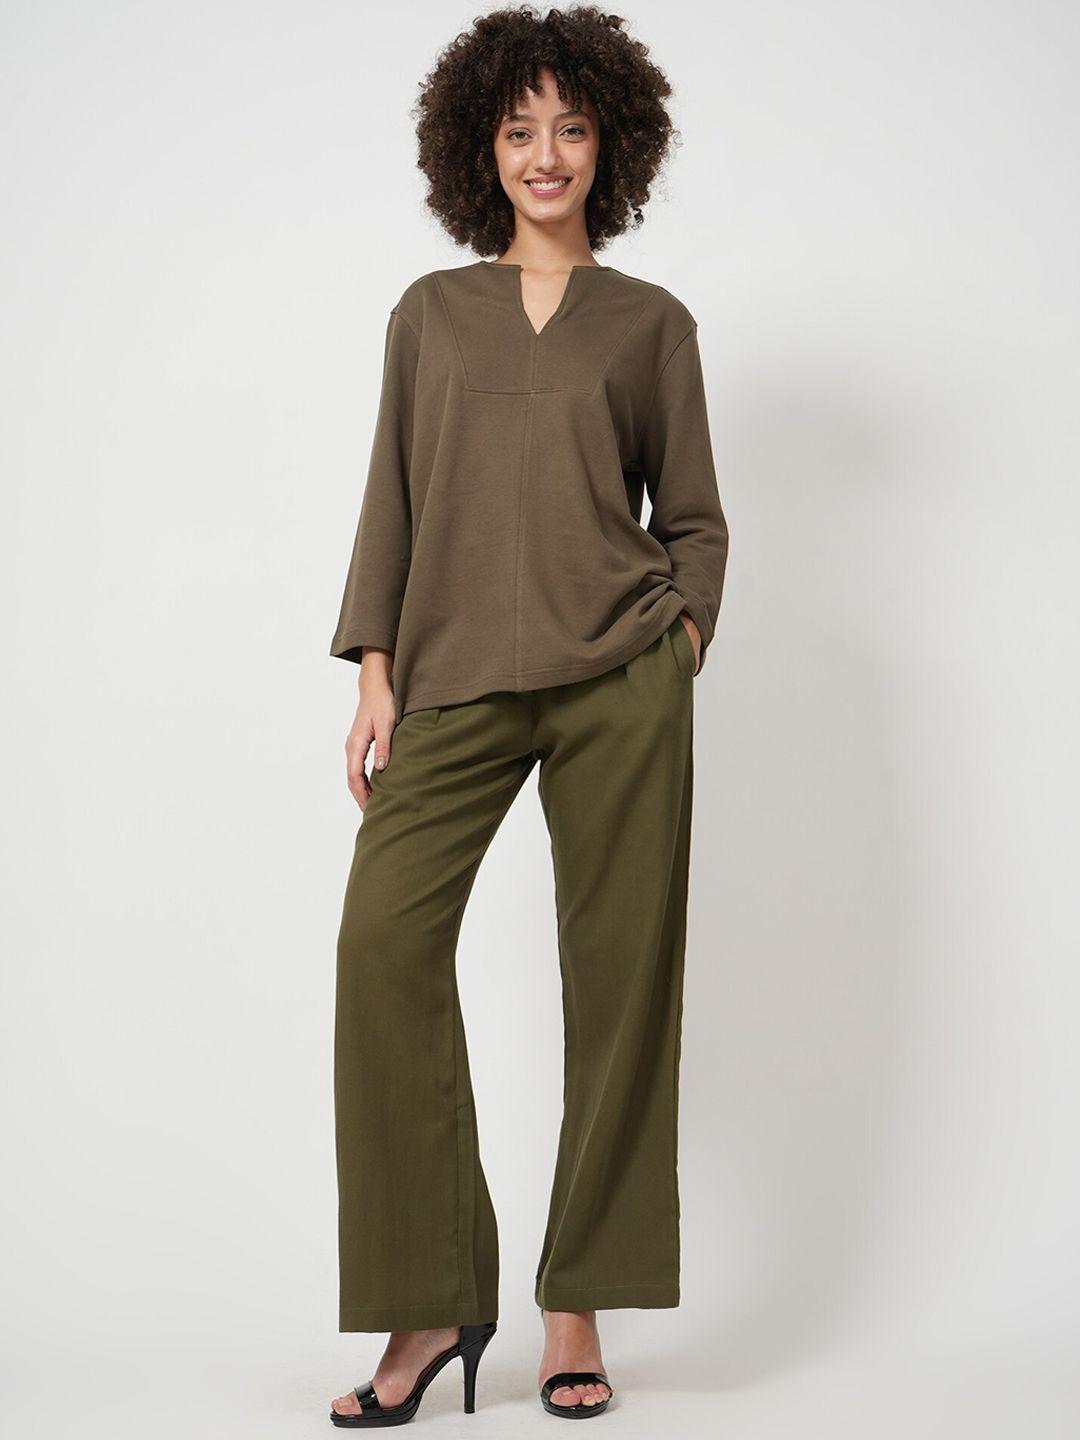 saltpetre v-neck top with trousers co-ords